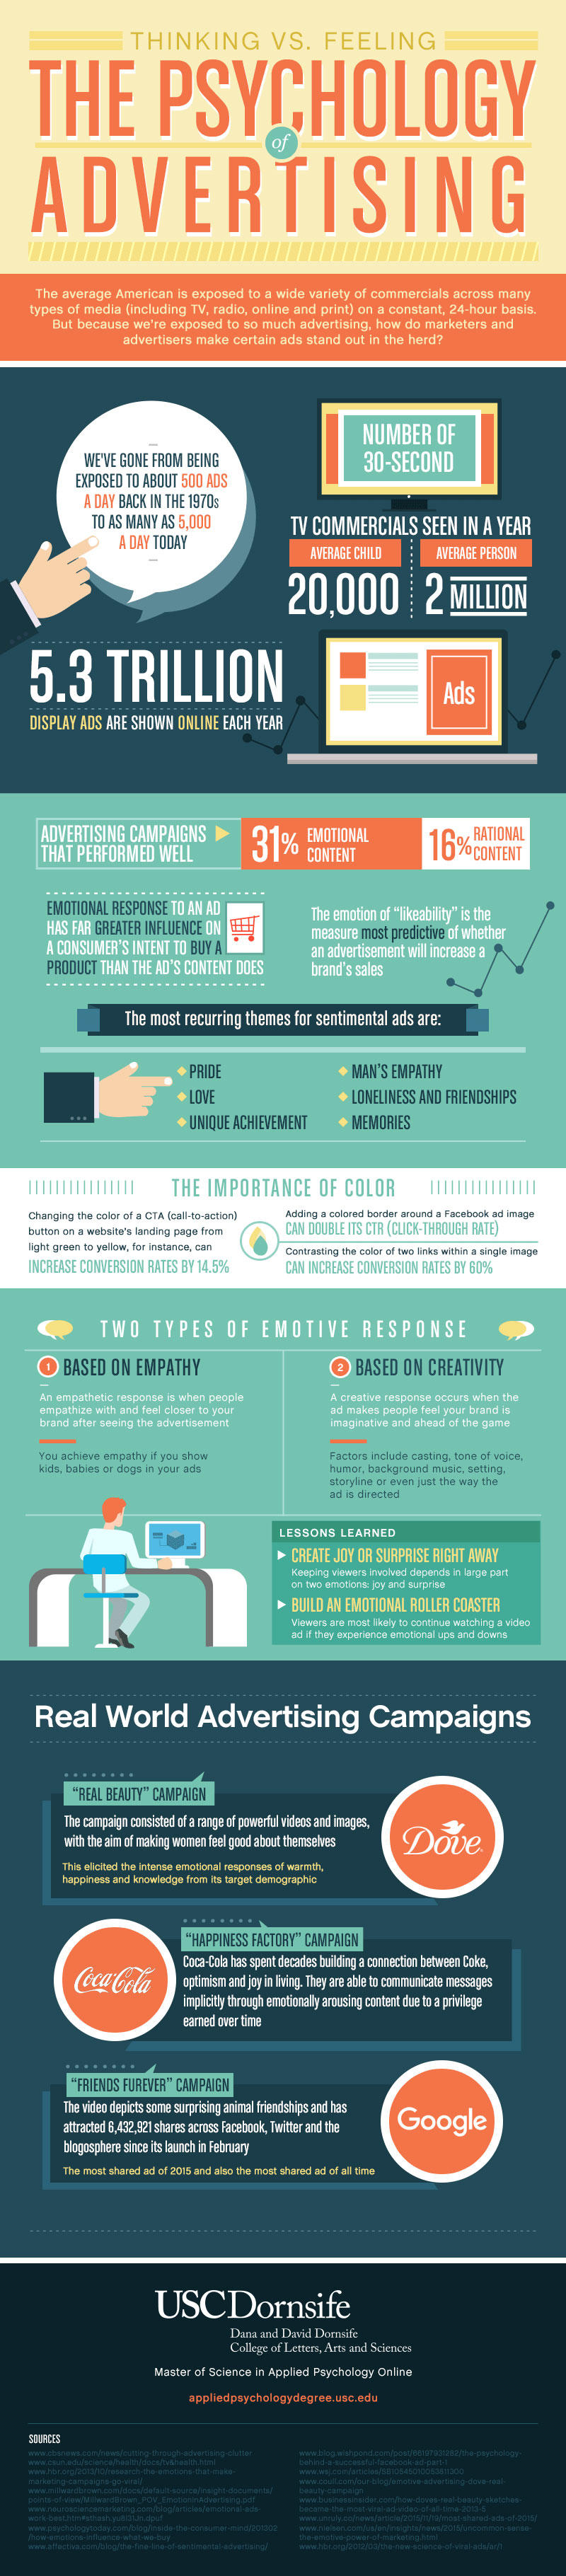 The Psychology of Advertising: Thinking vs. Feeling [Infographic]